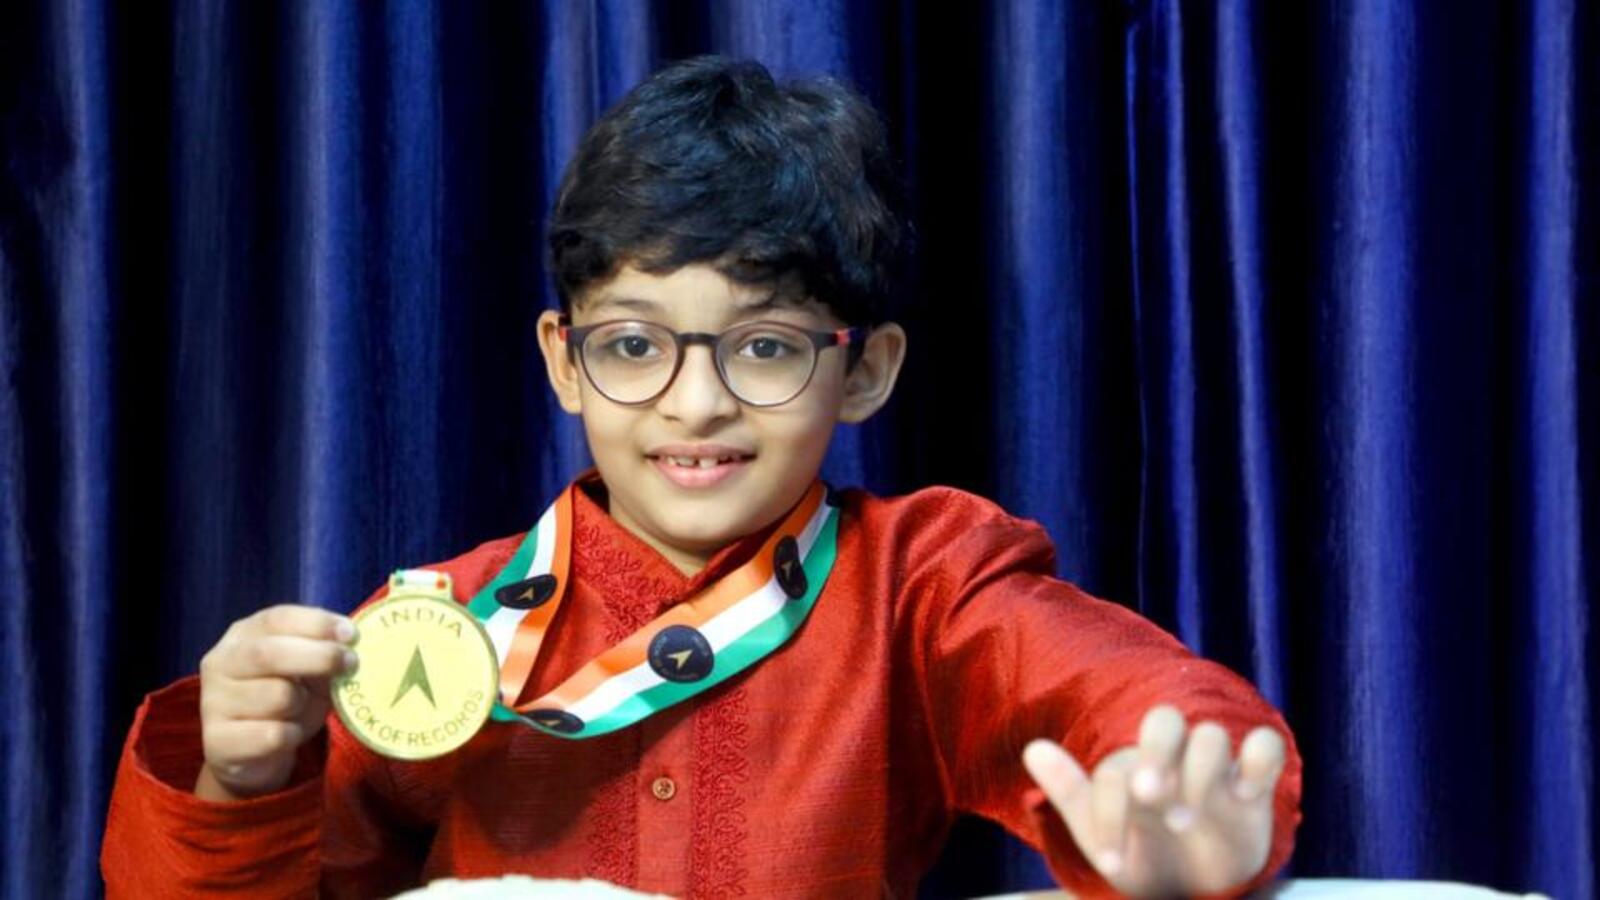 Eight year old Kian Bhatt is a tabla playing, record holding child prodigy